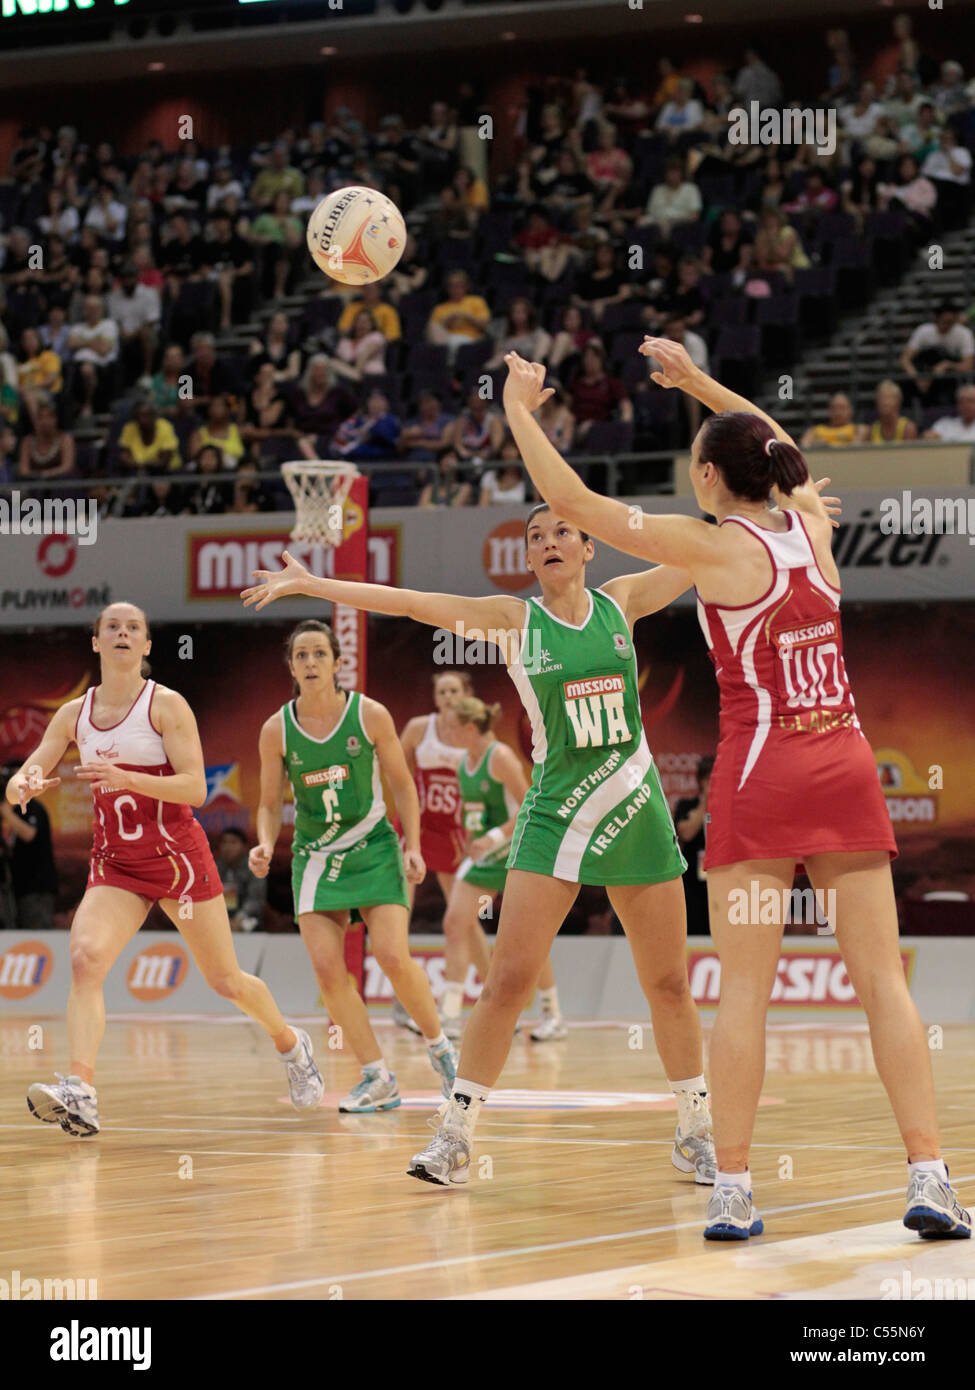 08.07.2011 Jade Clarke of England(right) lobs a pass over Hannah Irvine during the Quarter-finals between England and Northern Ireland, Mission Foods World Netball Championships 2011 from the Singapore Indoor Stadium in Singapore. Stock Photo